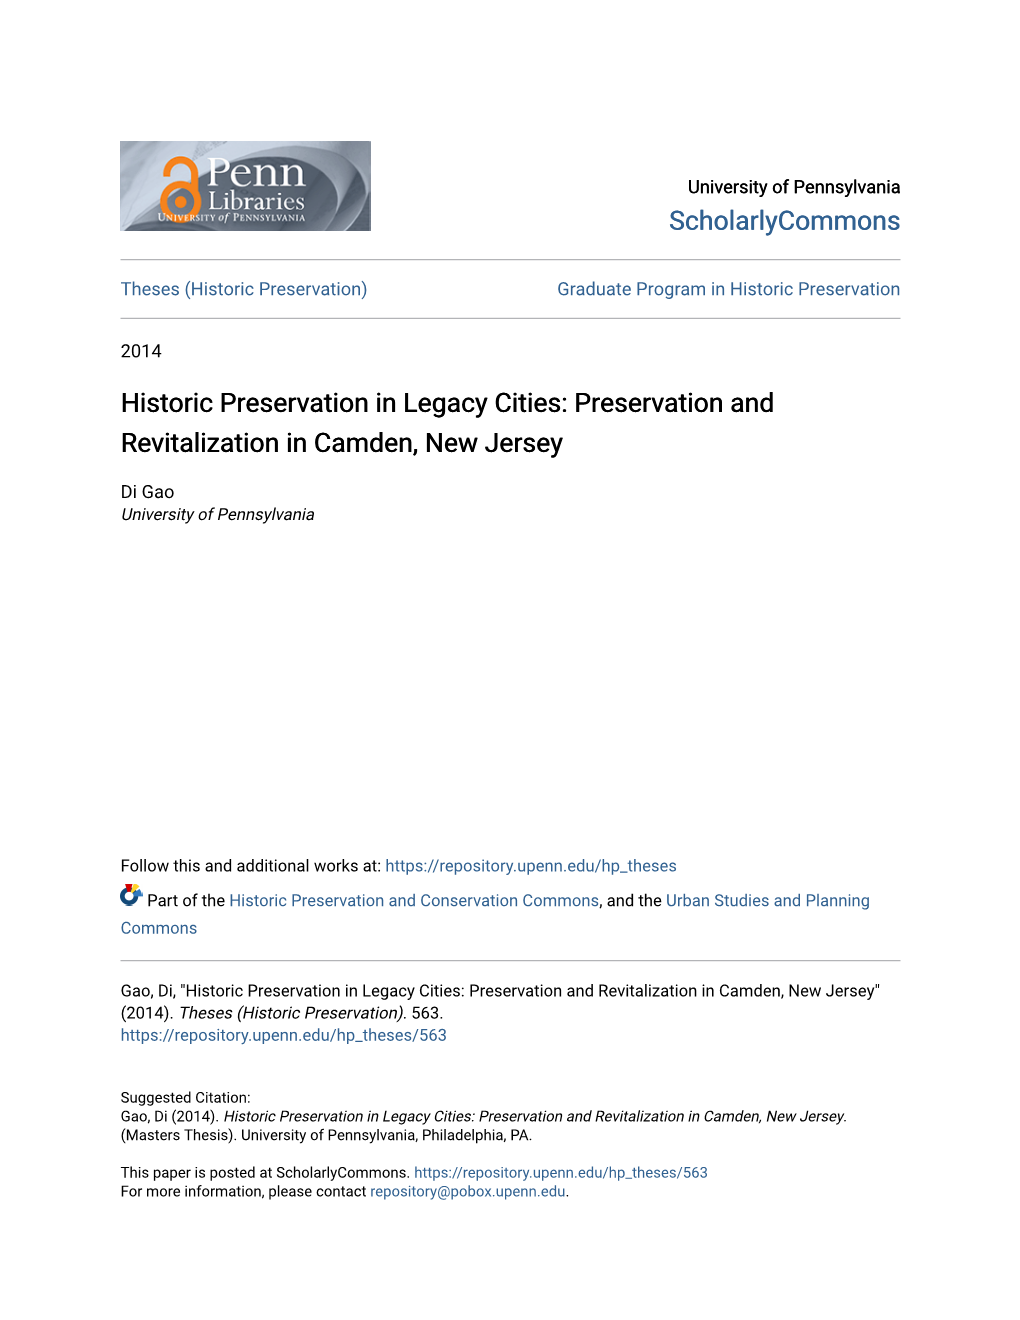 Historic Preservation in Legacy Cities: Preservation and Revitalization in Camden, New Jersey